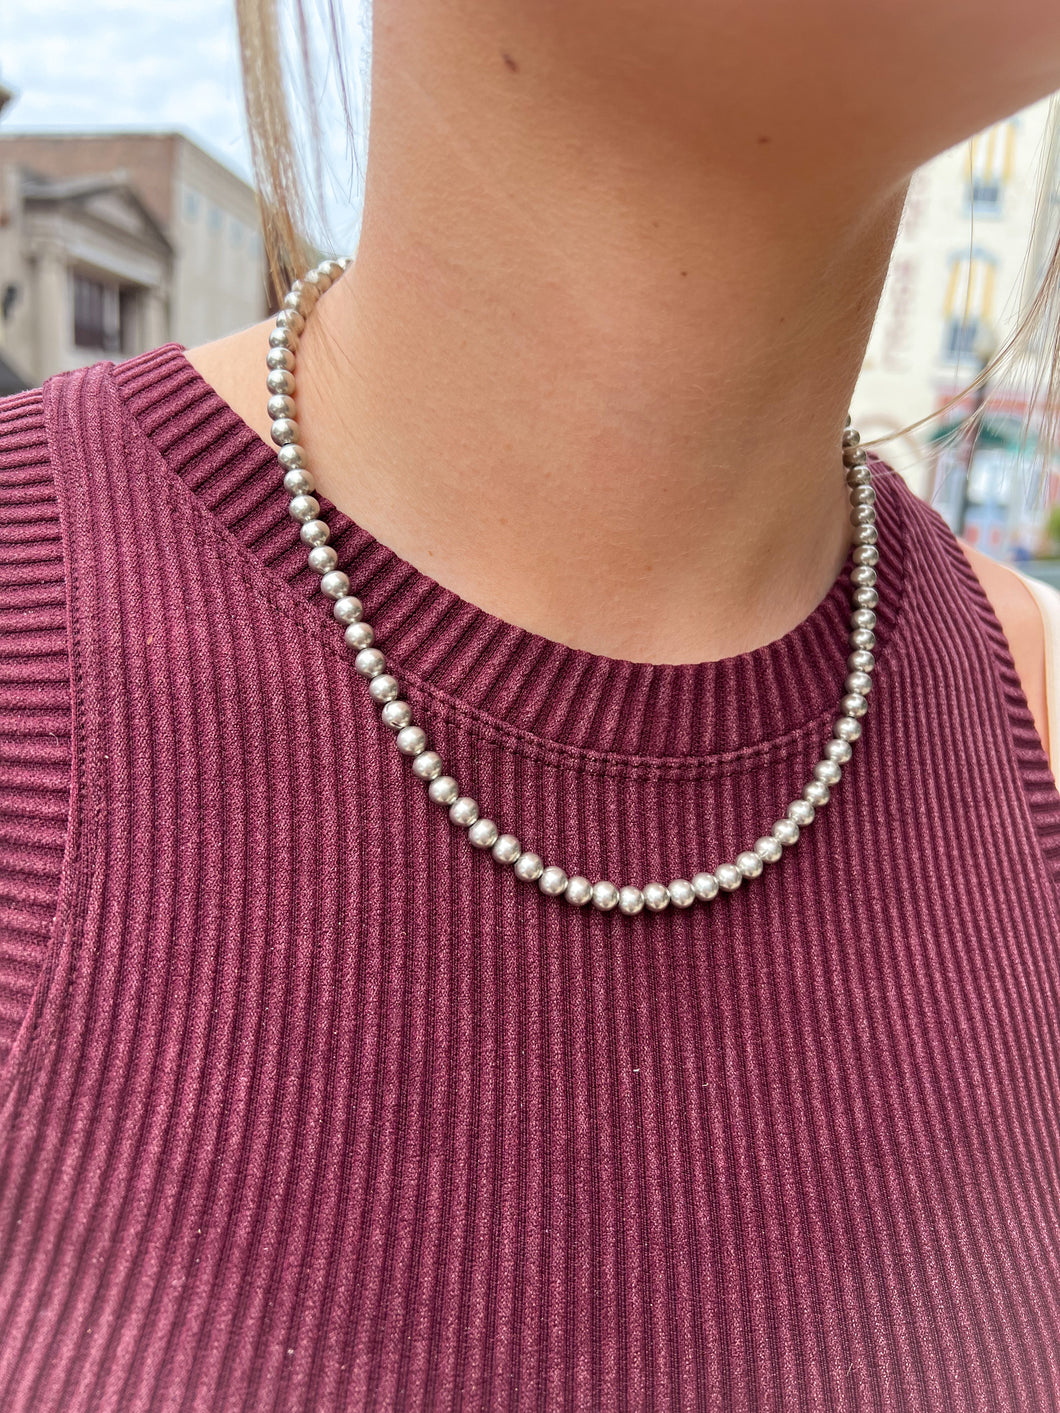 Silver Plated 6mm Bead 16 inch Necklace